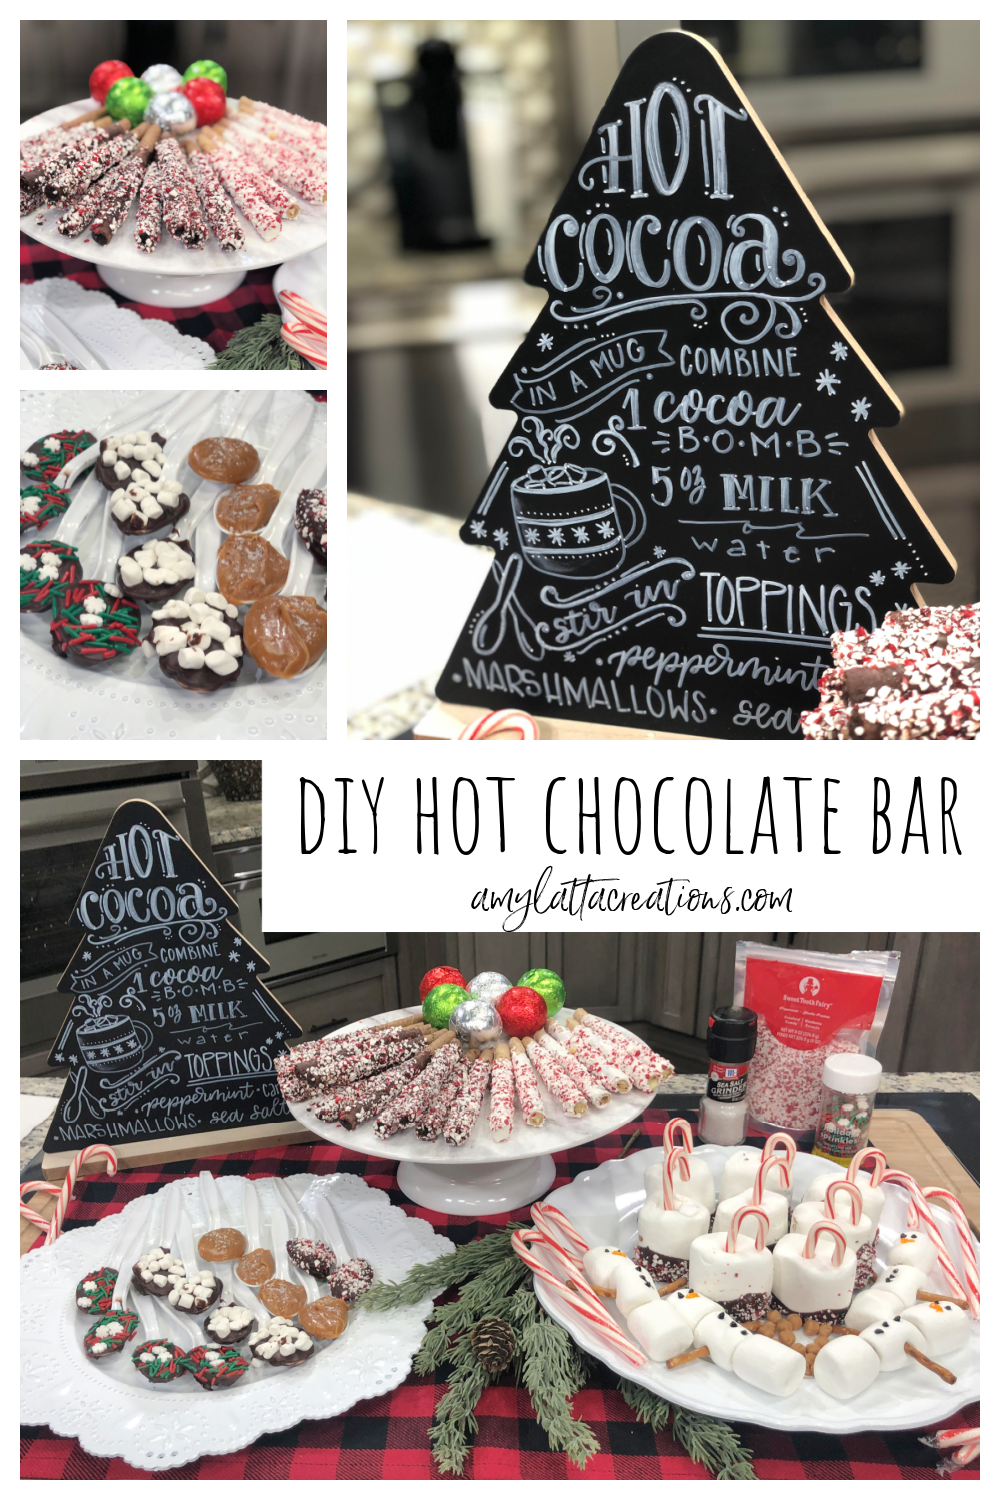 Image is a collage of a hot chocolate bar.